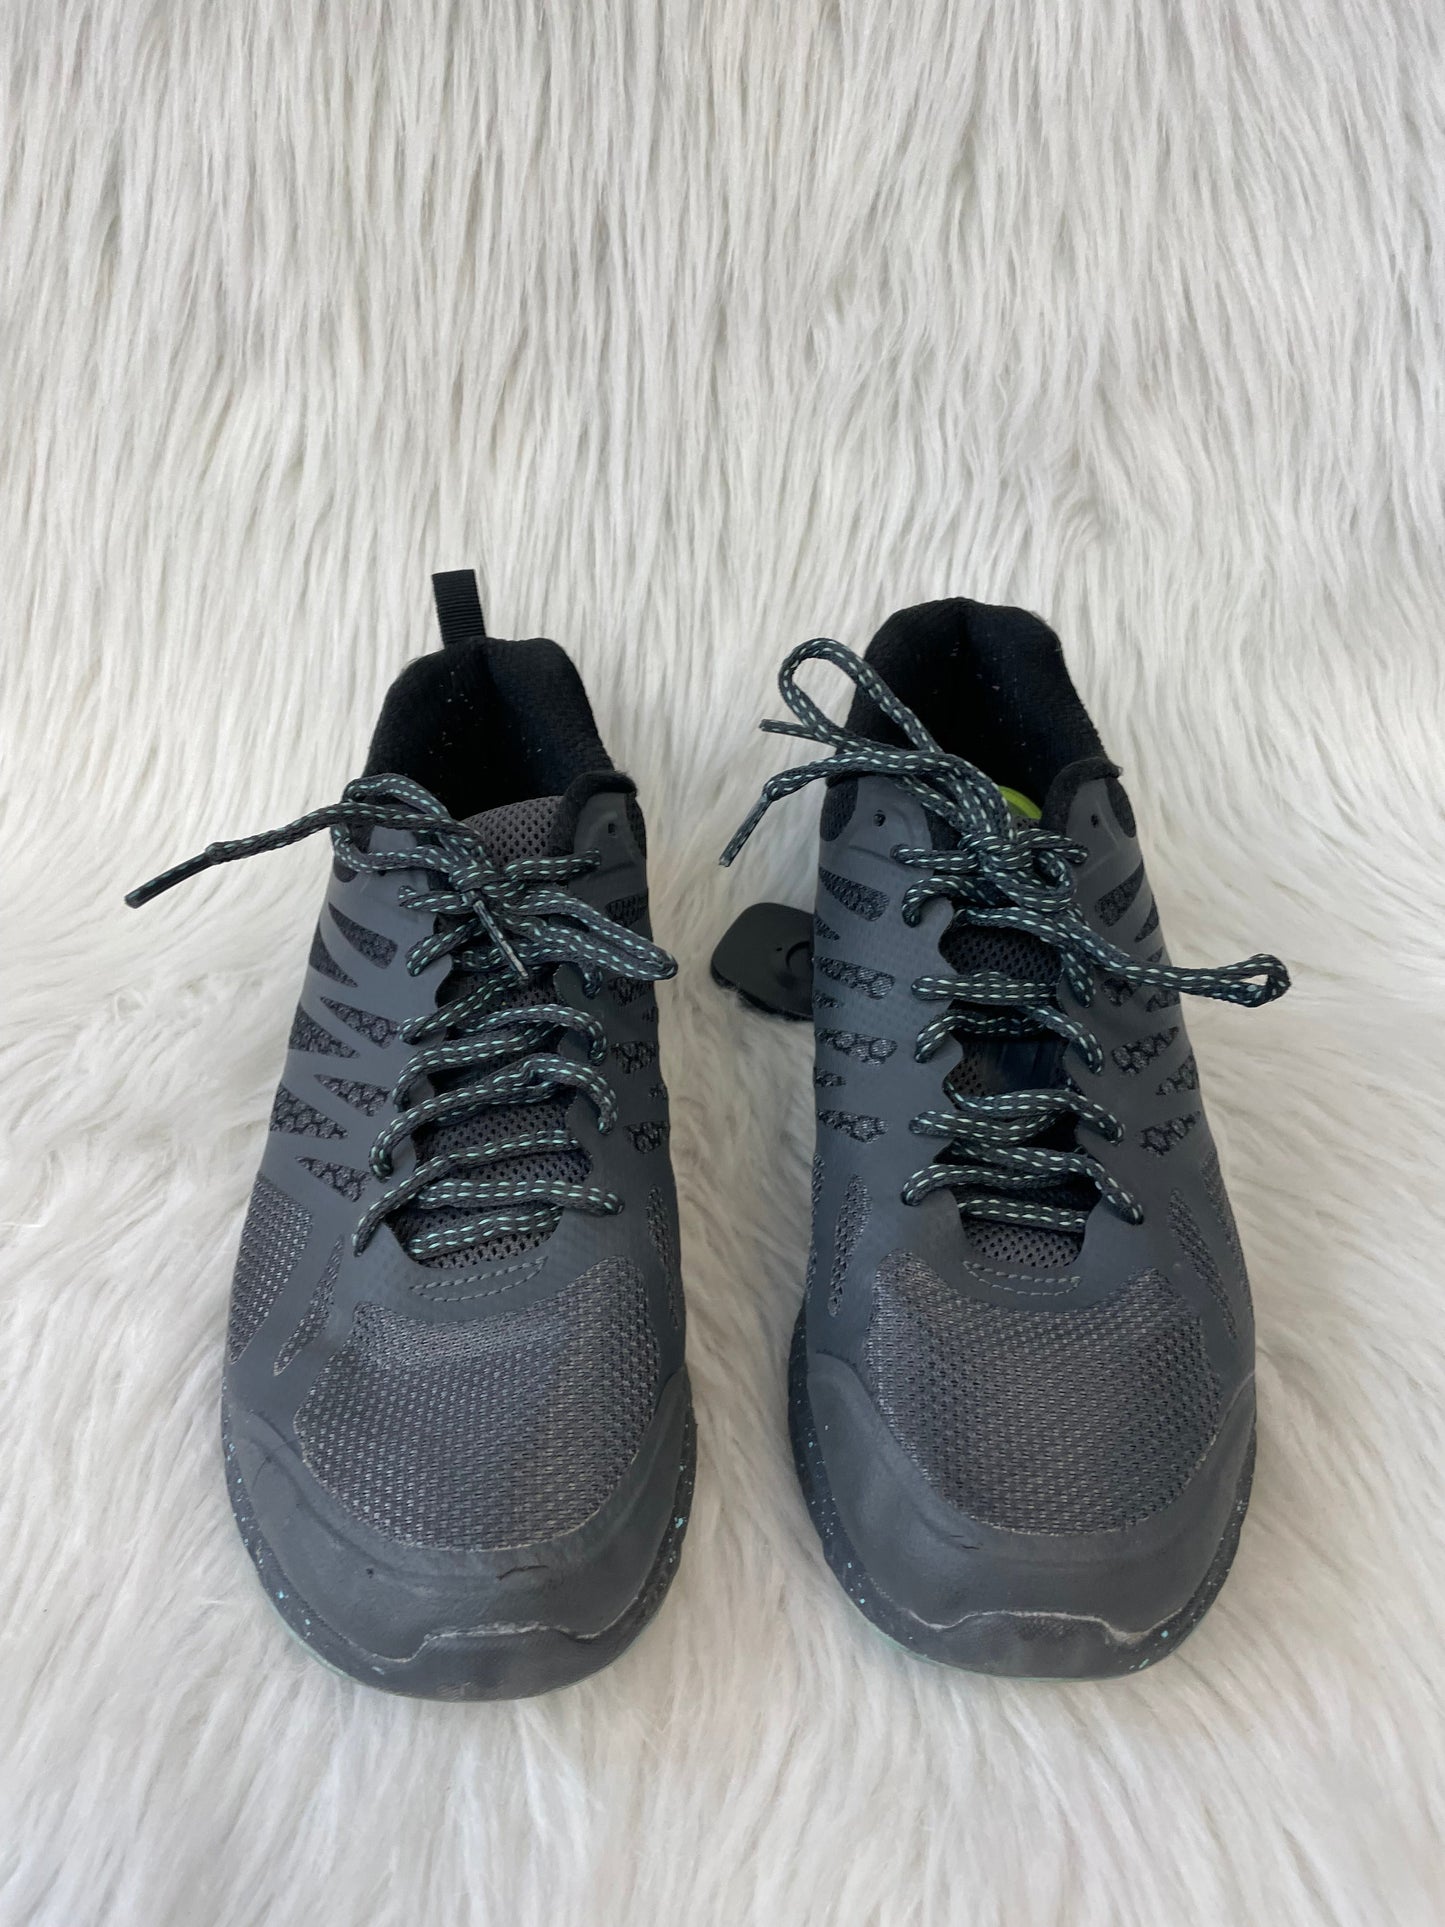 Charcoal Shoes Athletic Fila, Size 9.5